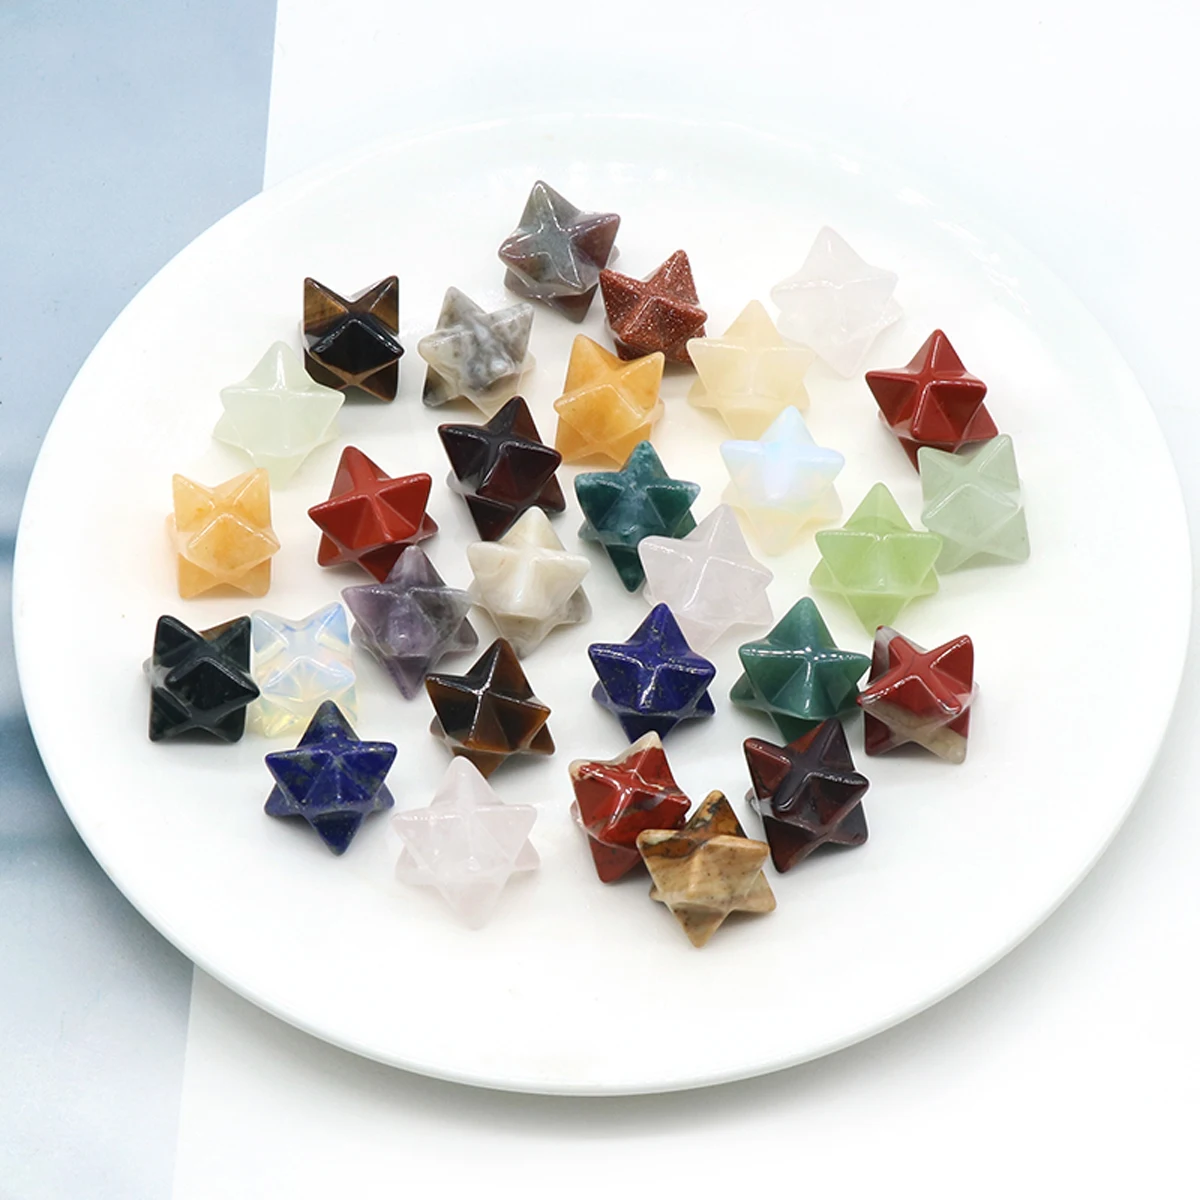 

Natural Stone Ornament Pocket Stone Kaba Star Shape Gemstone Healing Landscape for Jewelry Making Study Room Accessories Gifts